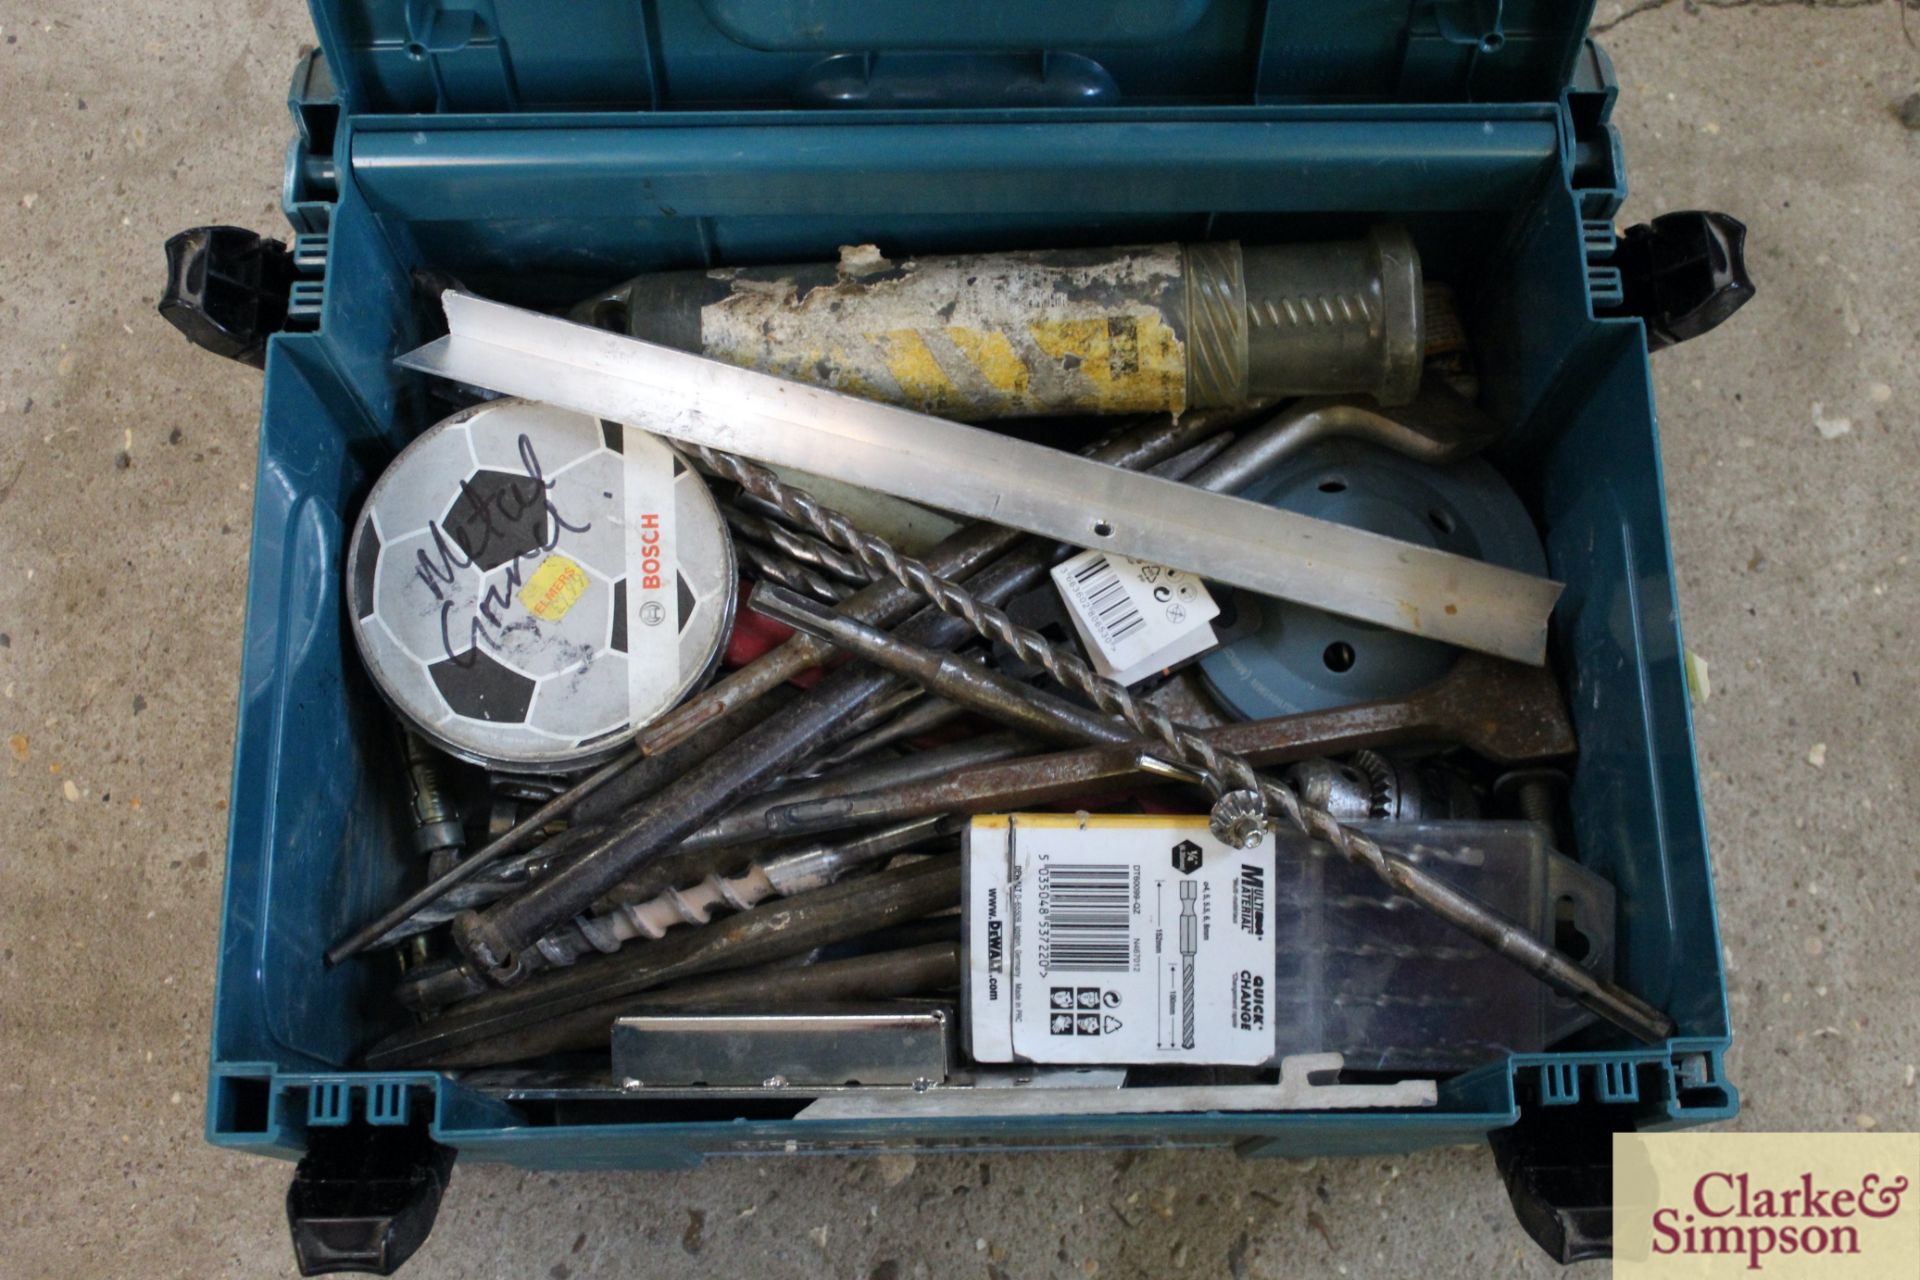 Makita toolbox containing large quantity of SDS and other drill bits and chisels. - Image 2 of 2